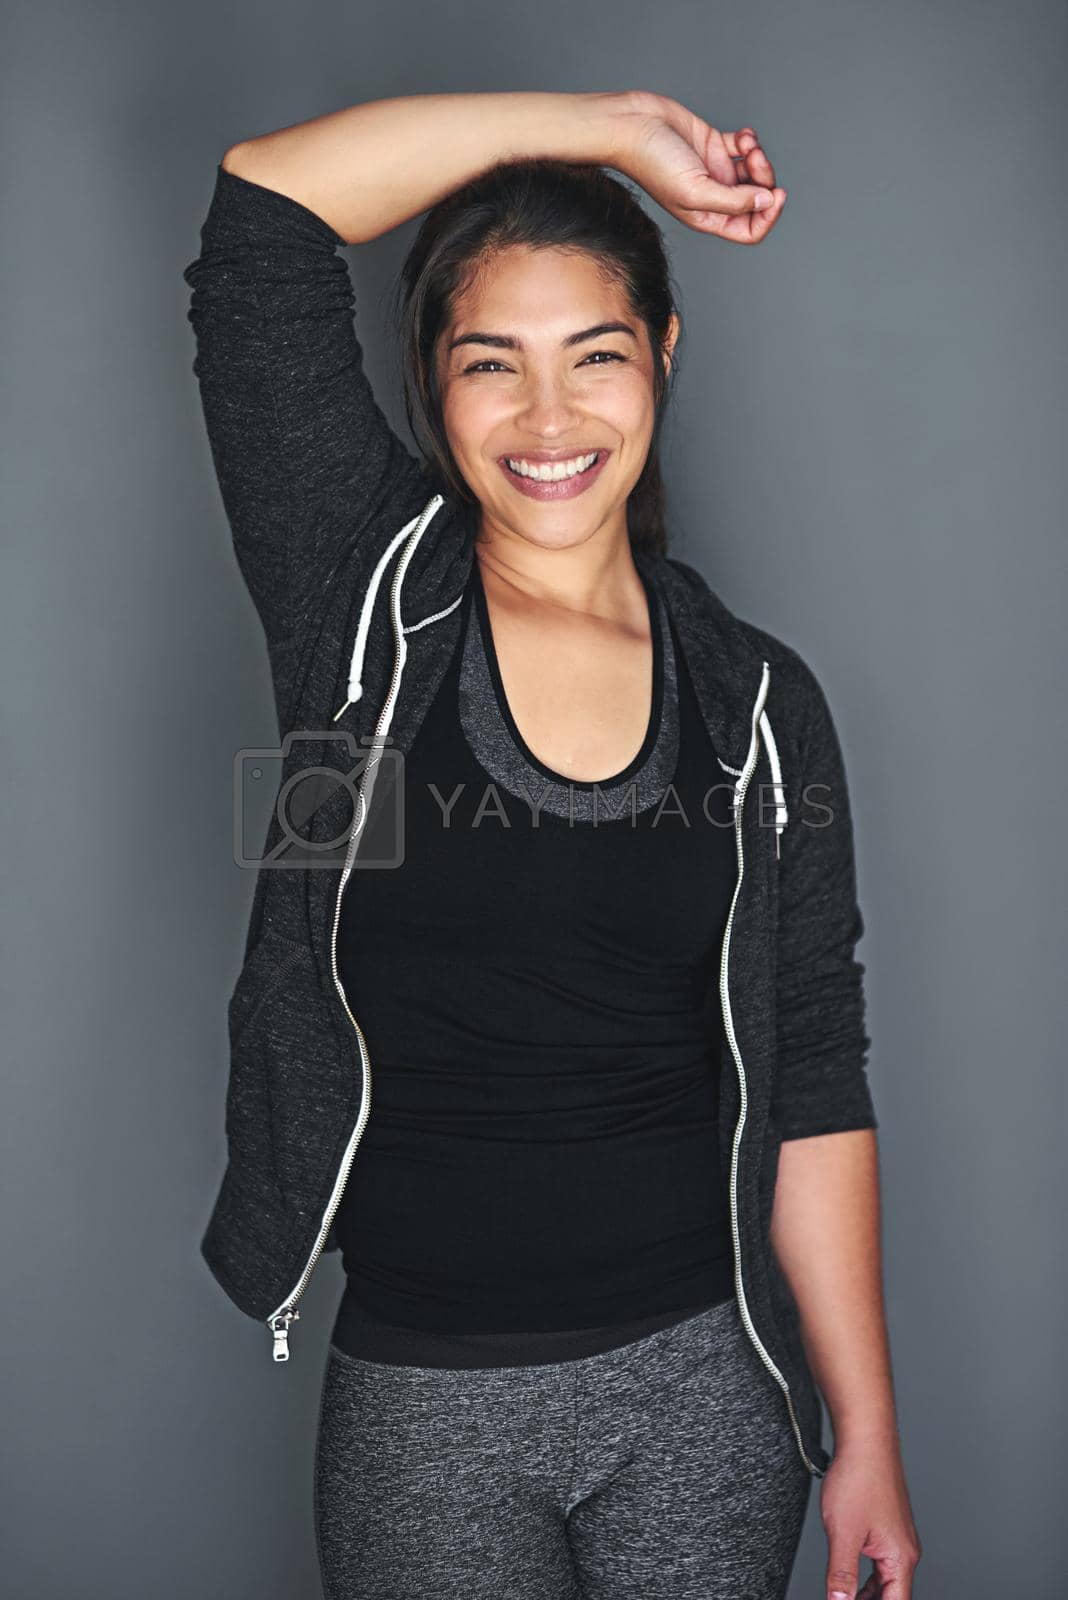 Royalty free image of She thrives on exercise. Portrait of a fit young woman in sports clothing posing against a gray background. by YuriArcurs